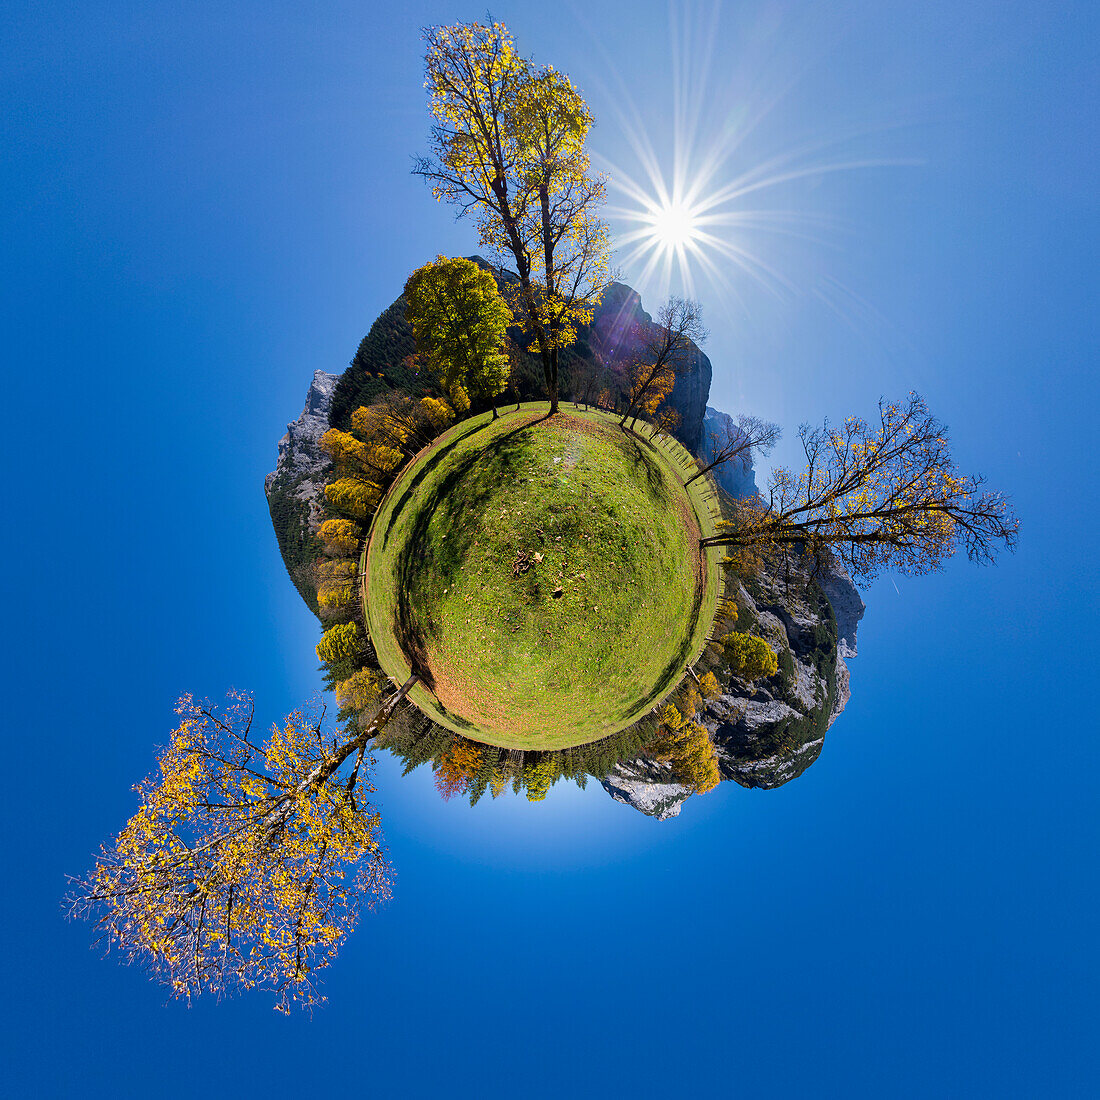 autumncolors in the Eng, maple, Acer pseudoplatanus, little planet, Austria, Europe